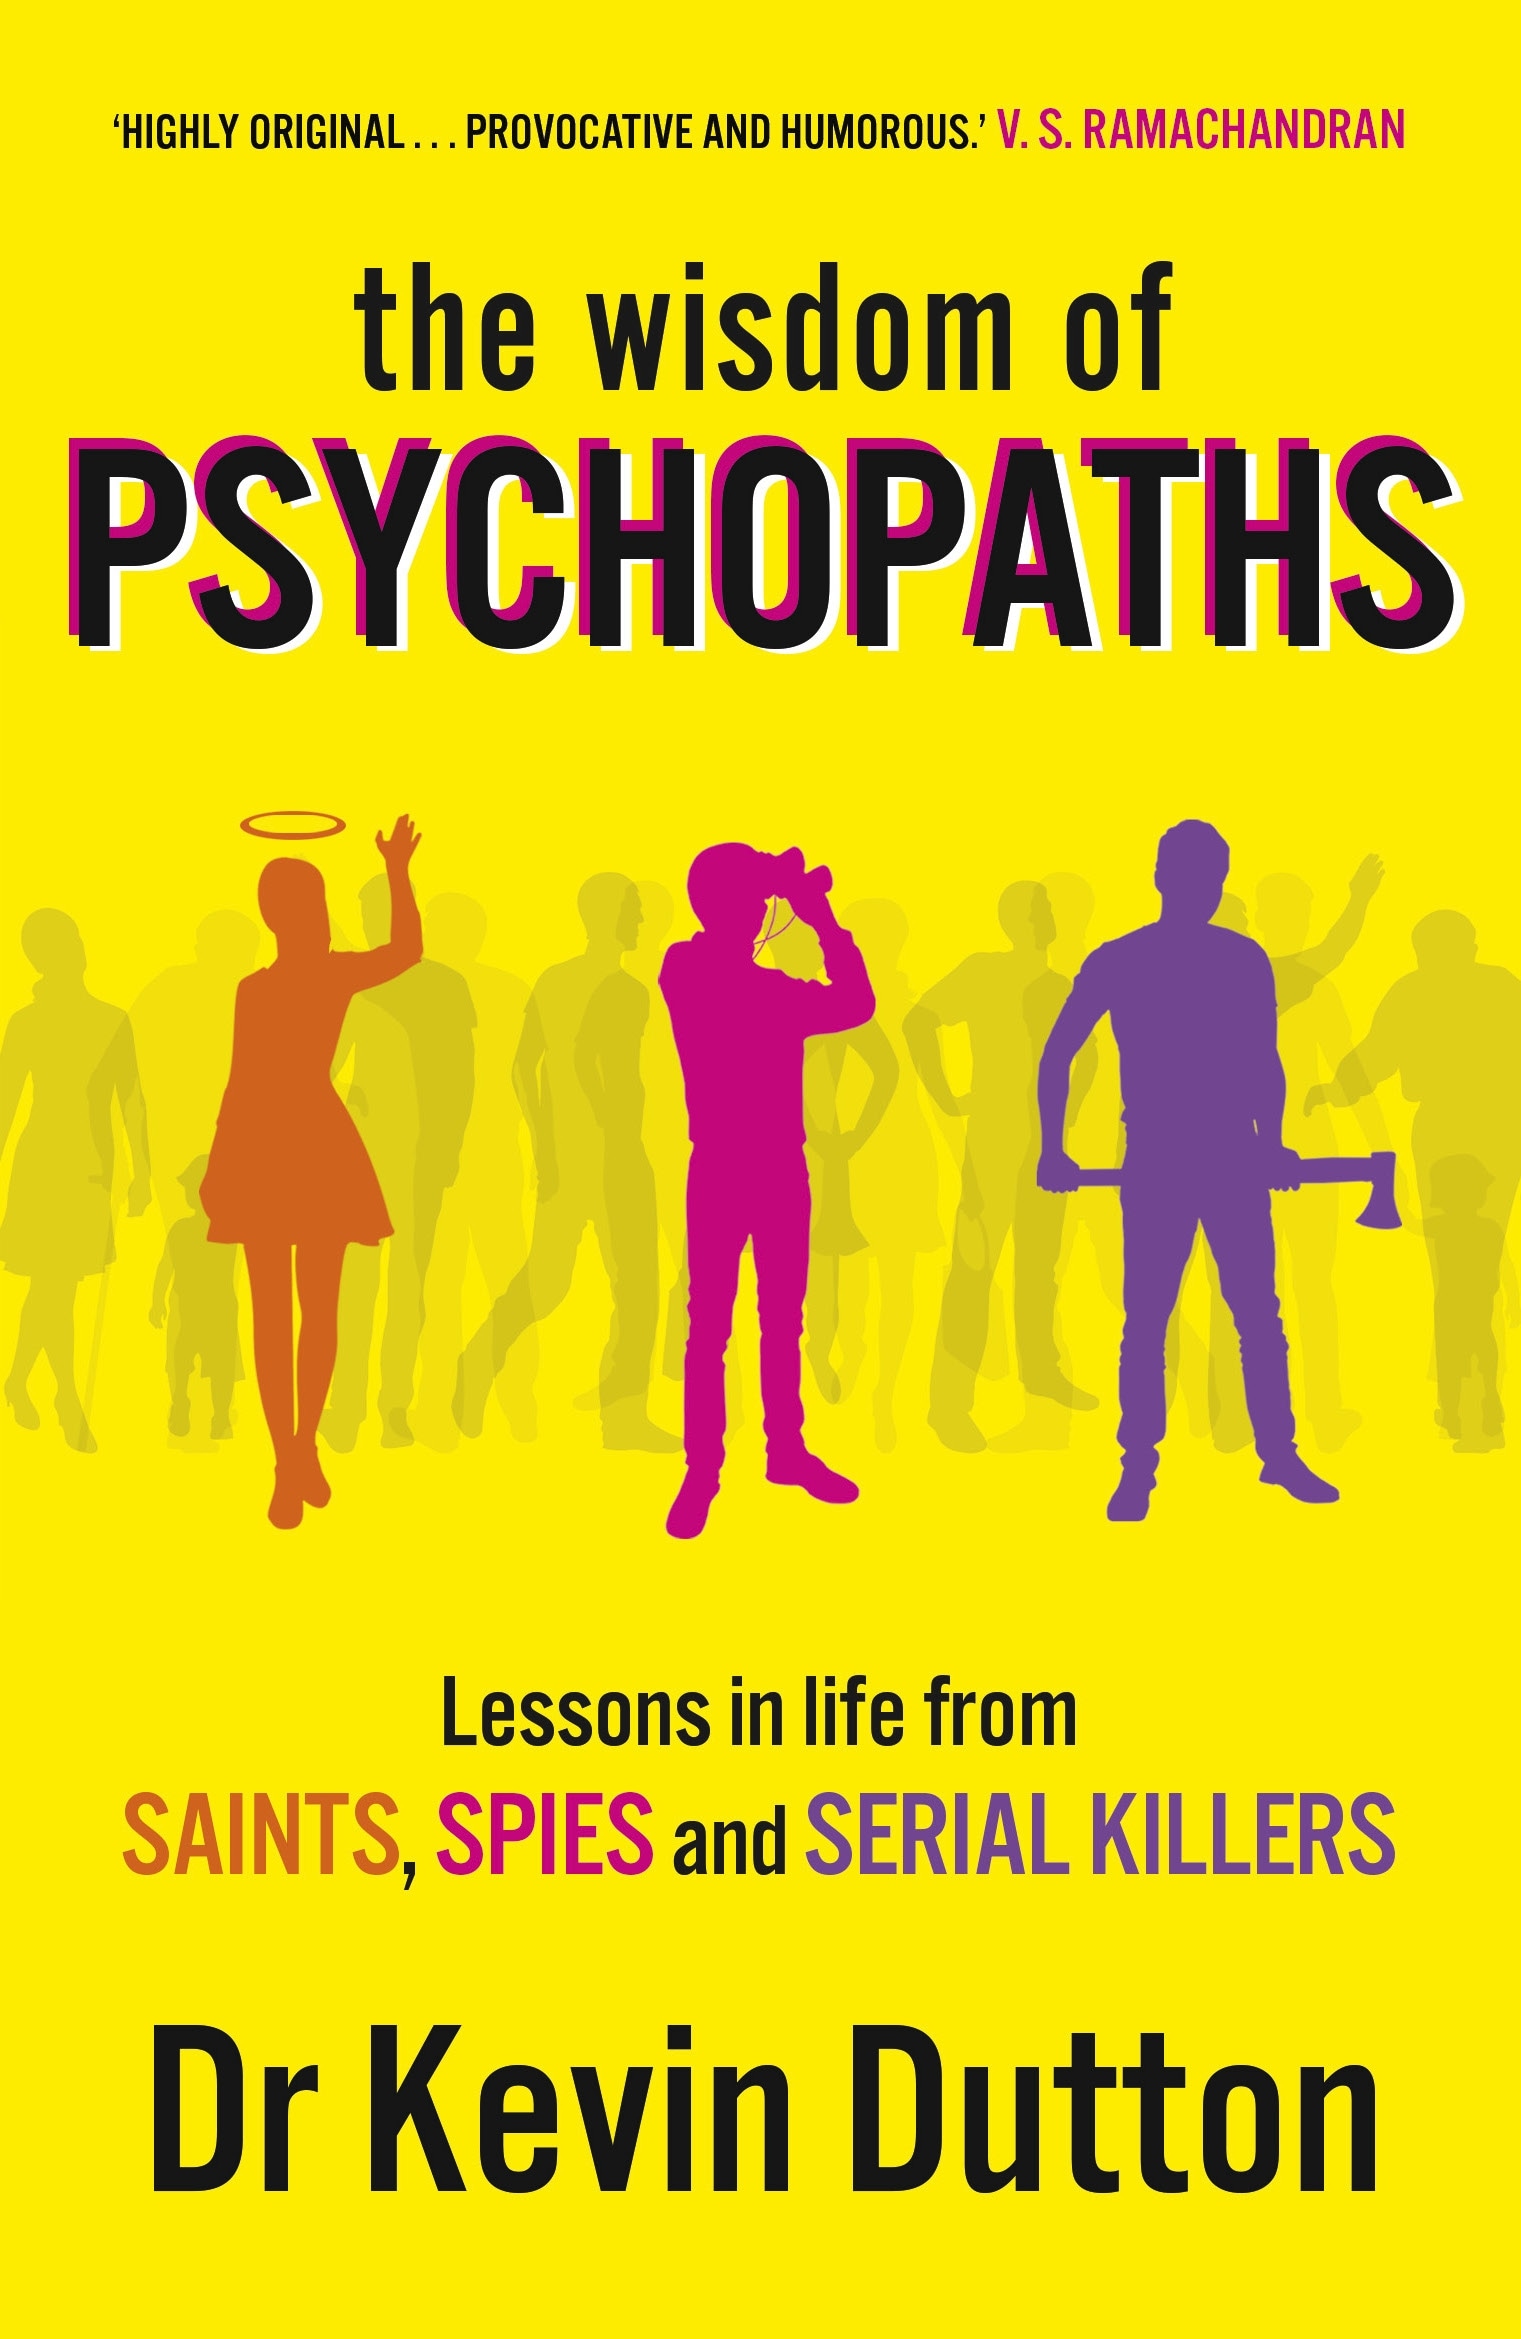 Book “The Wisdom of Psychopaths” by Kevin Dutton — September 12, 2013